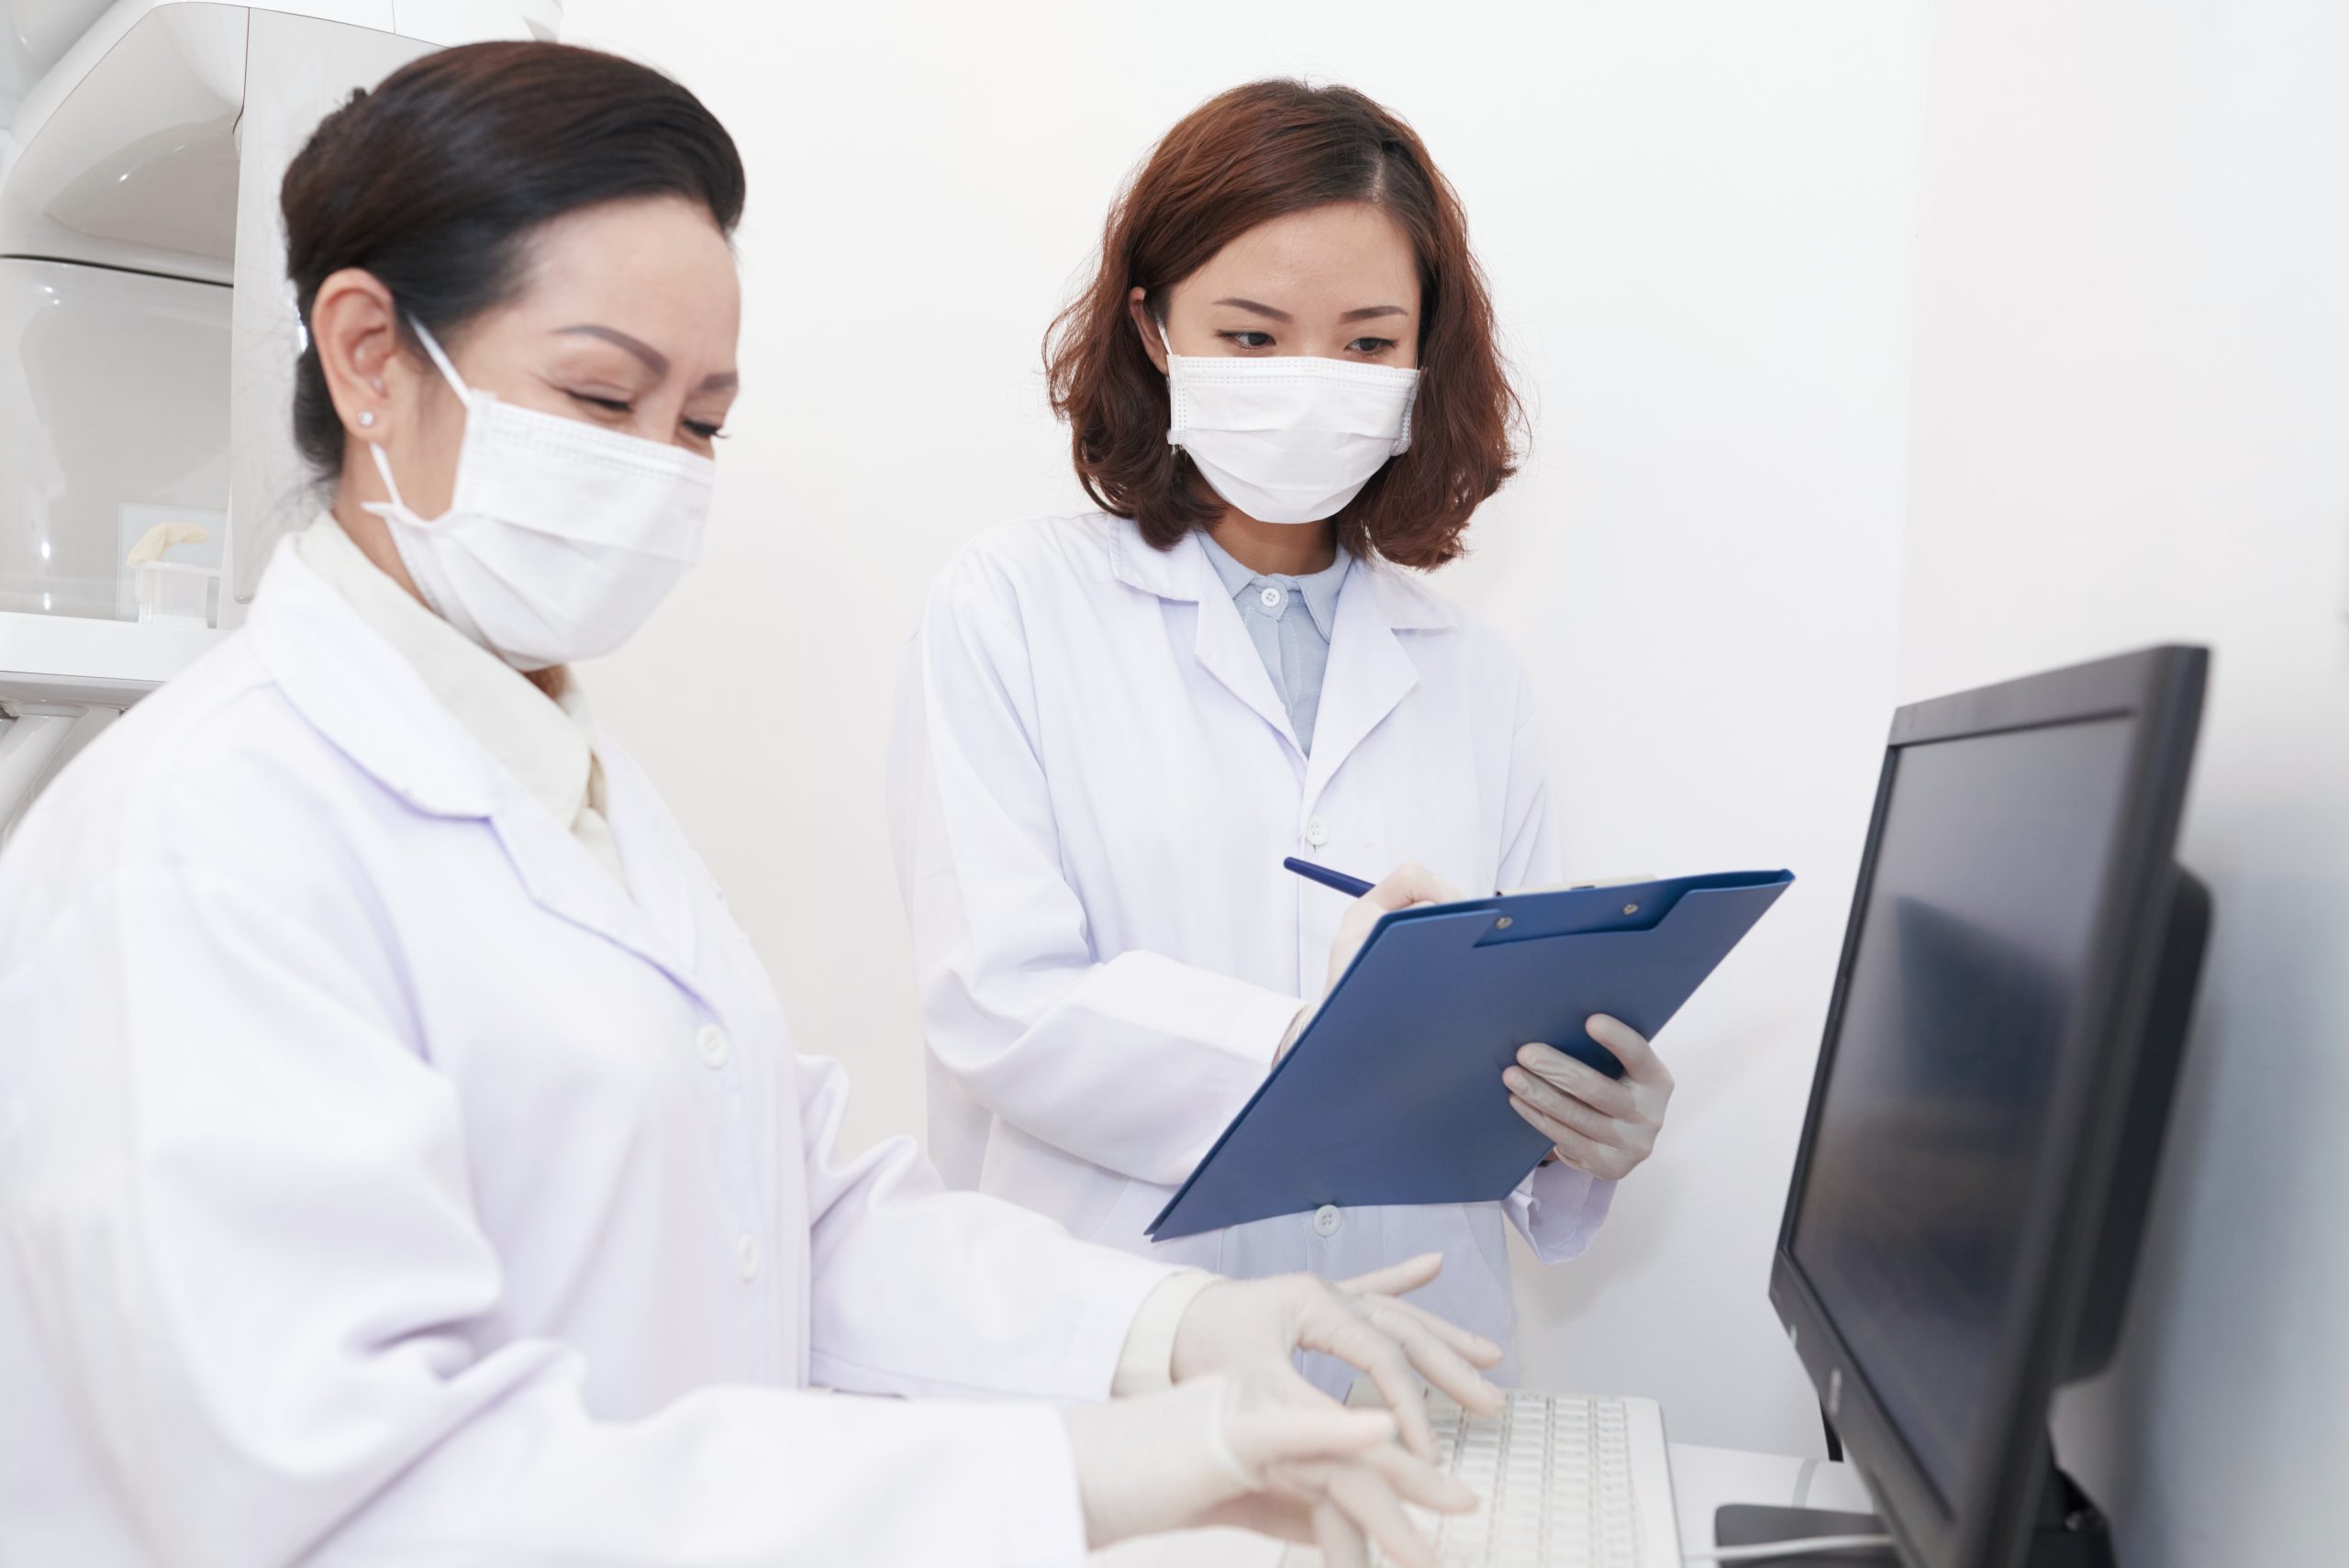 Dentist reading medical record aloud and nurse entering information in computer